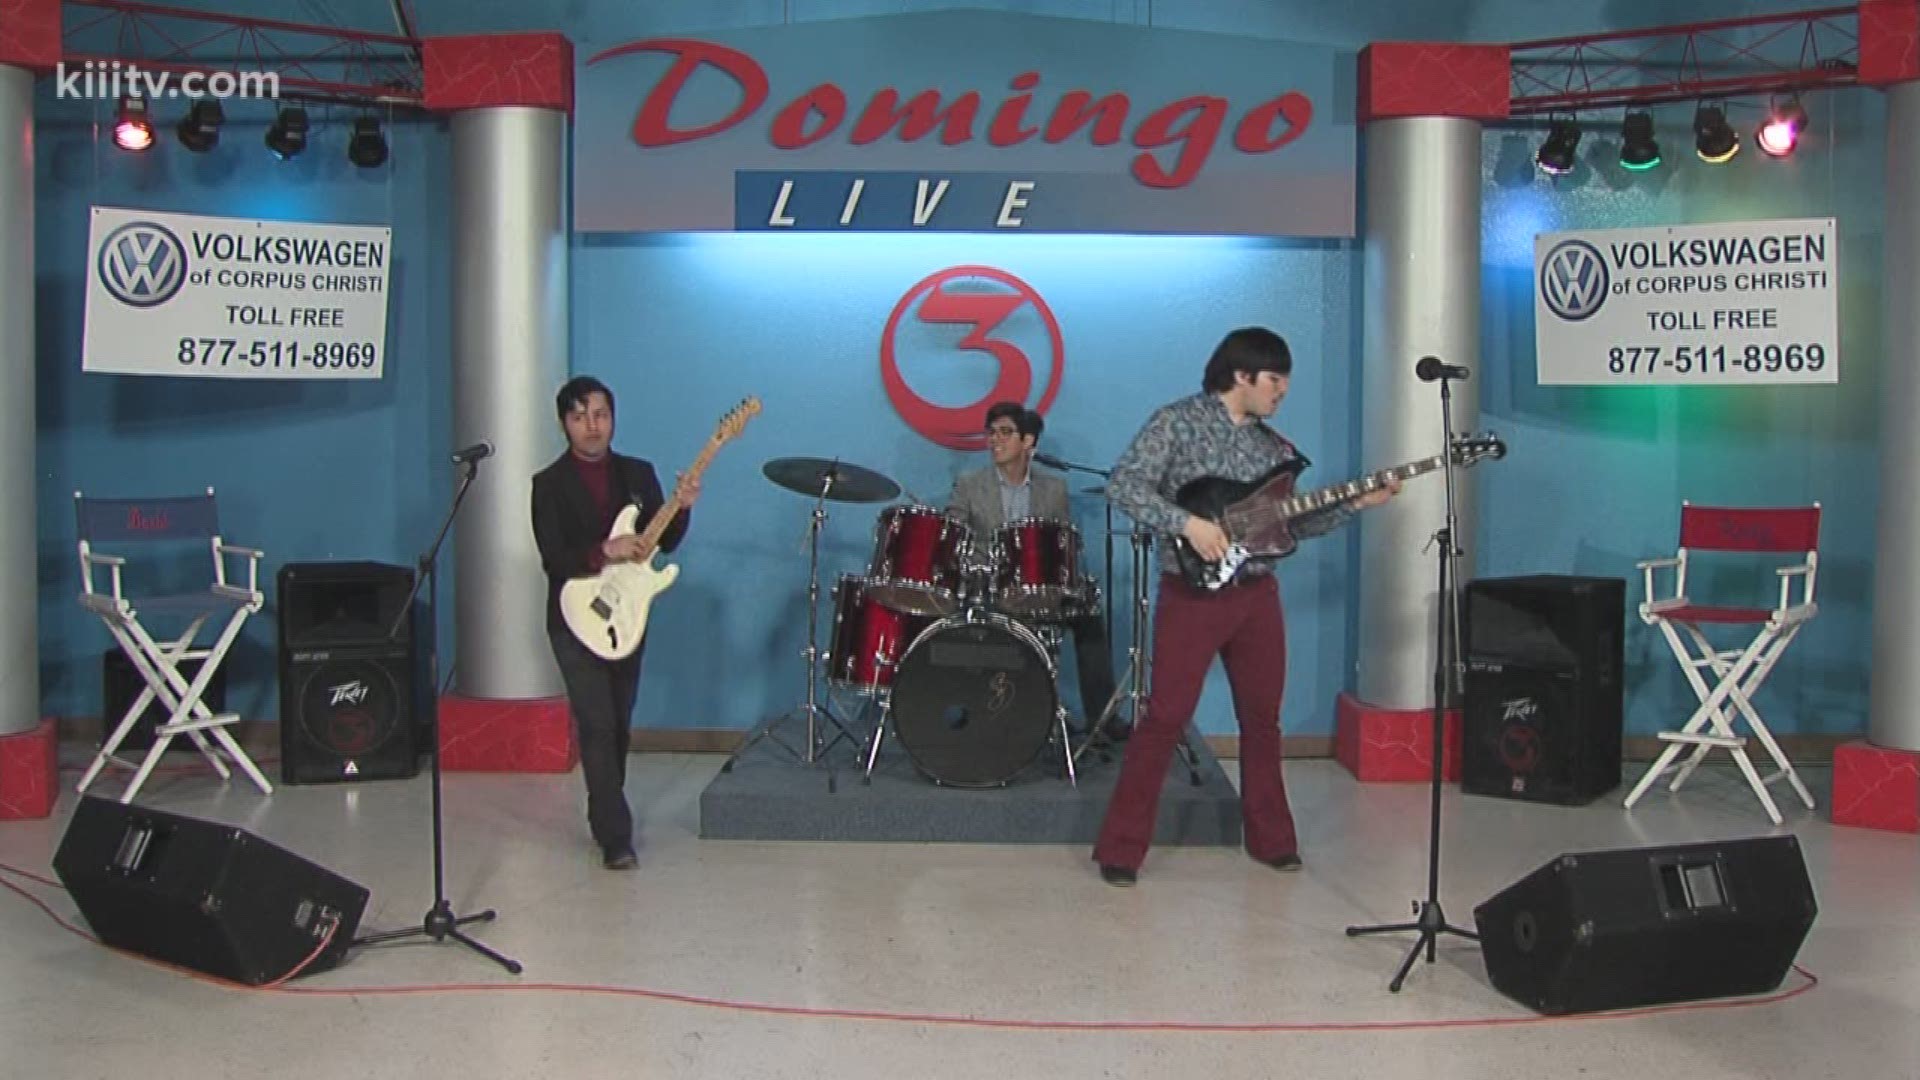 The Blind Owls Performing "Alright" on Domingo Live